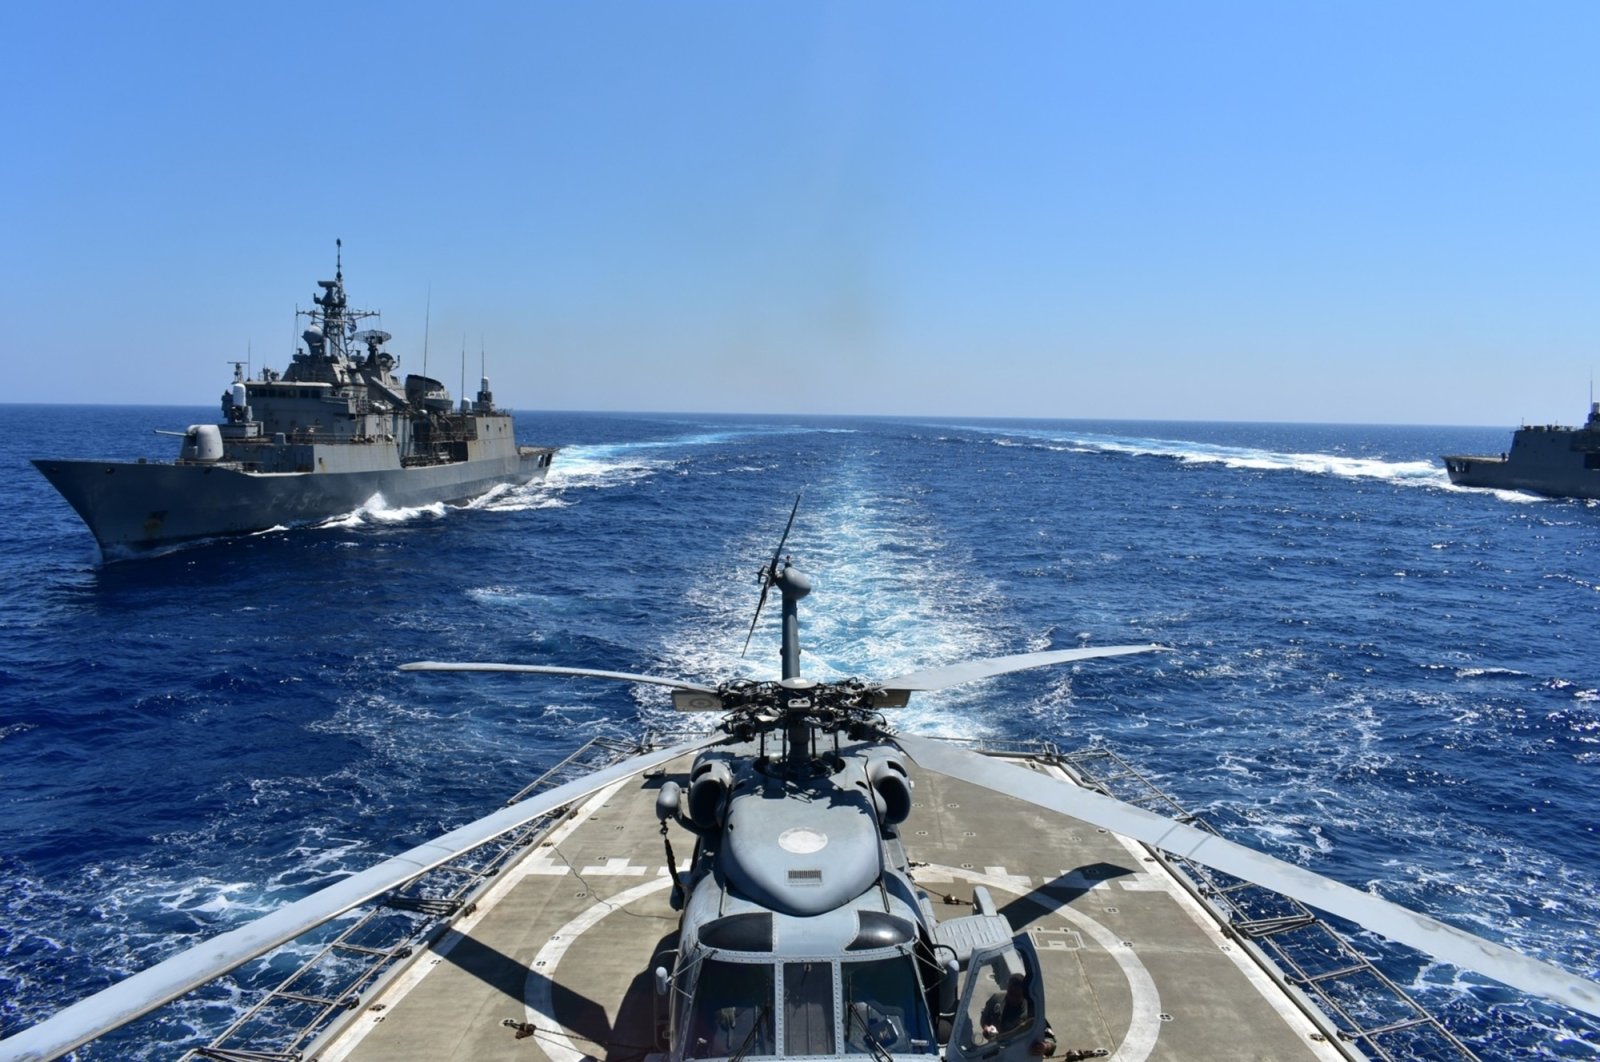 Greek warships take part in a military exercise in Eastern Mediterranean sea, Aug. 25, 2020. (AP Photo)